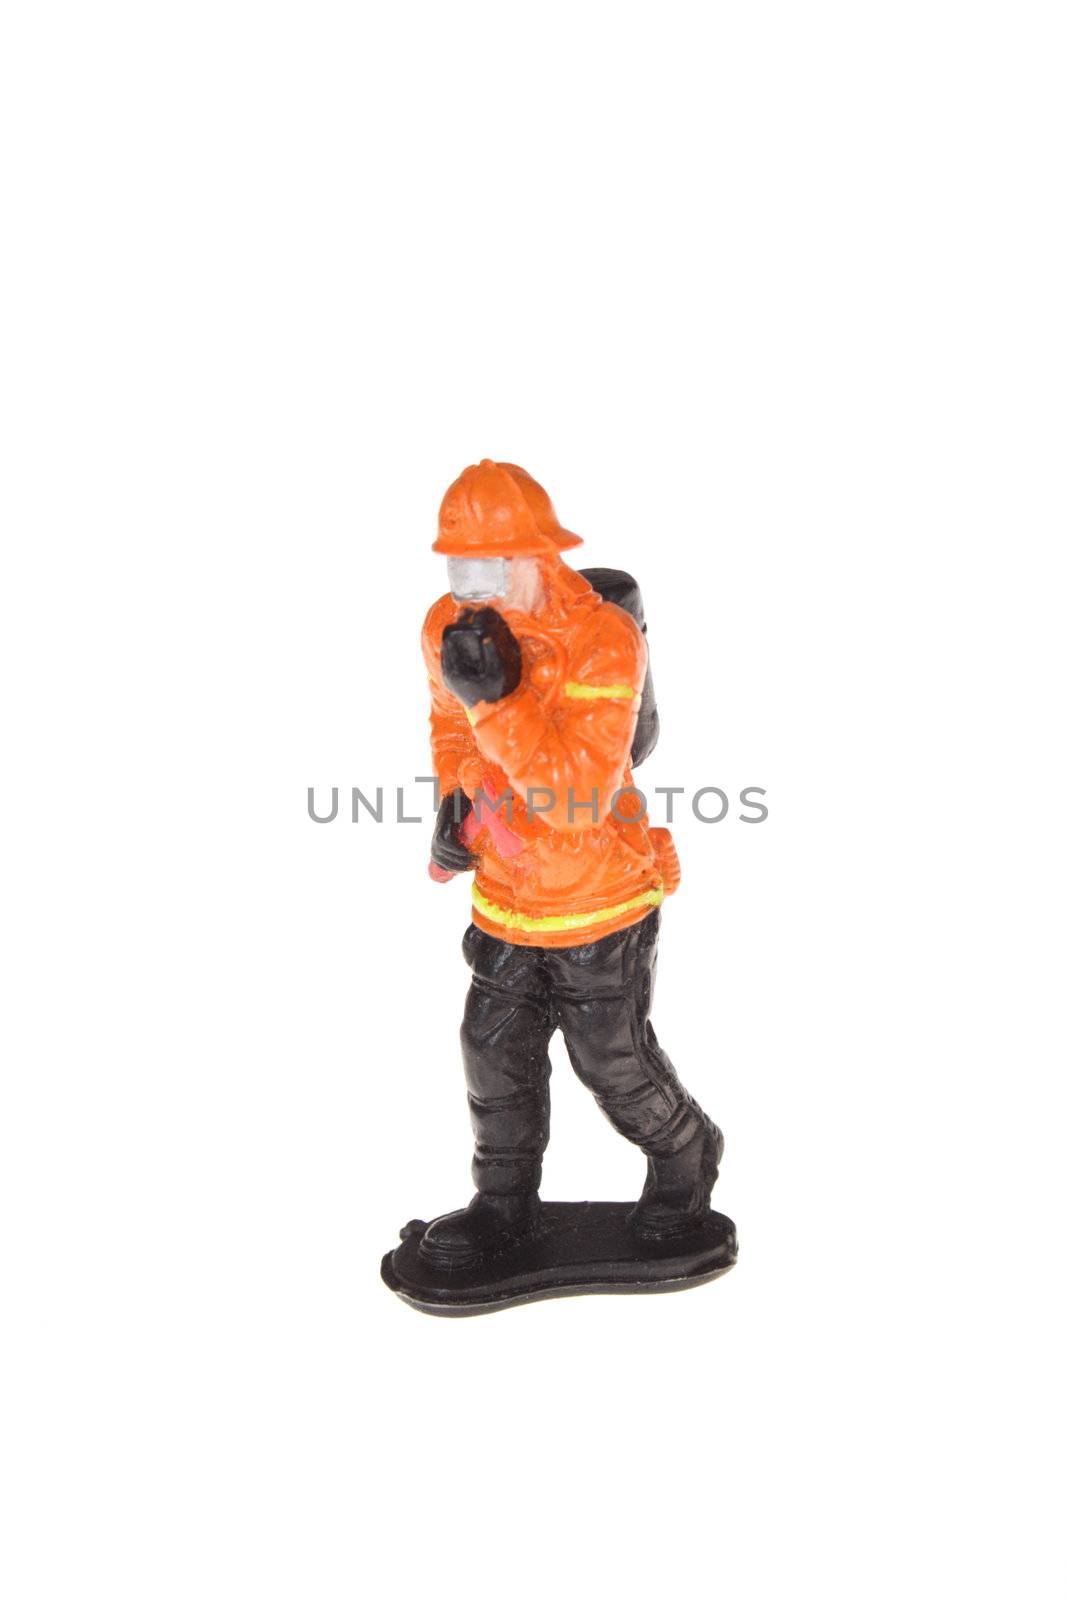 plastic fireman, photo on the white background